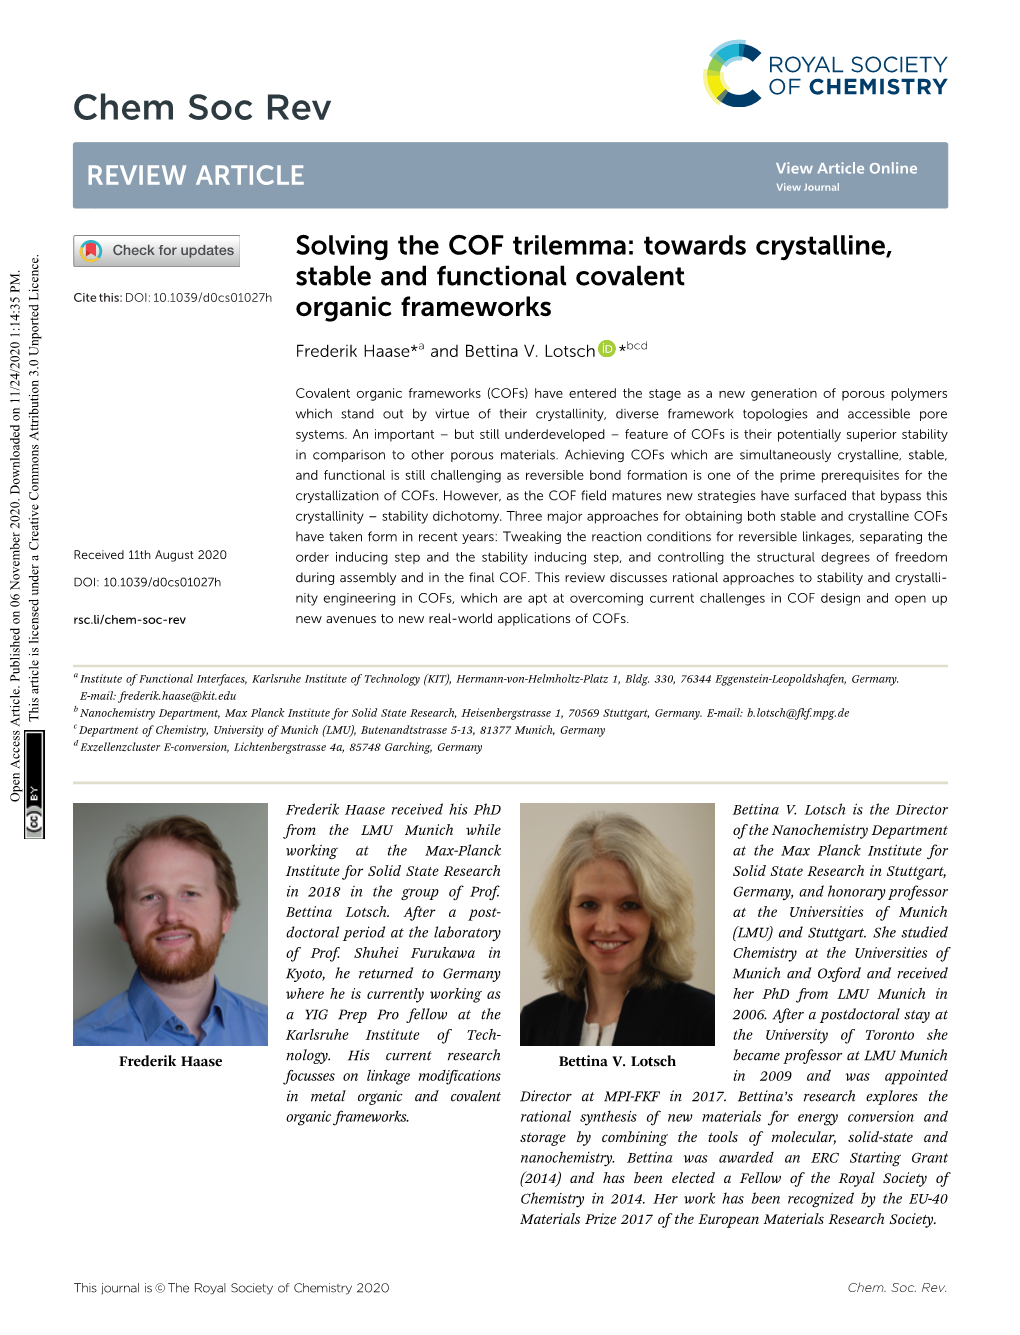 Solving the COF Trilemma: Towards Crystalline, Stable and Functional Covalent Cite This: DOI: 10.1039/D0cs01027h Organic Frameworks